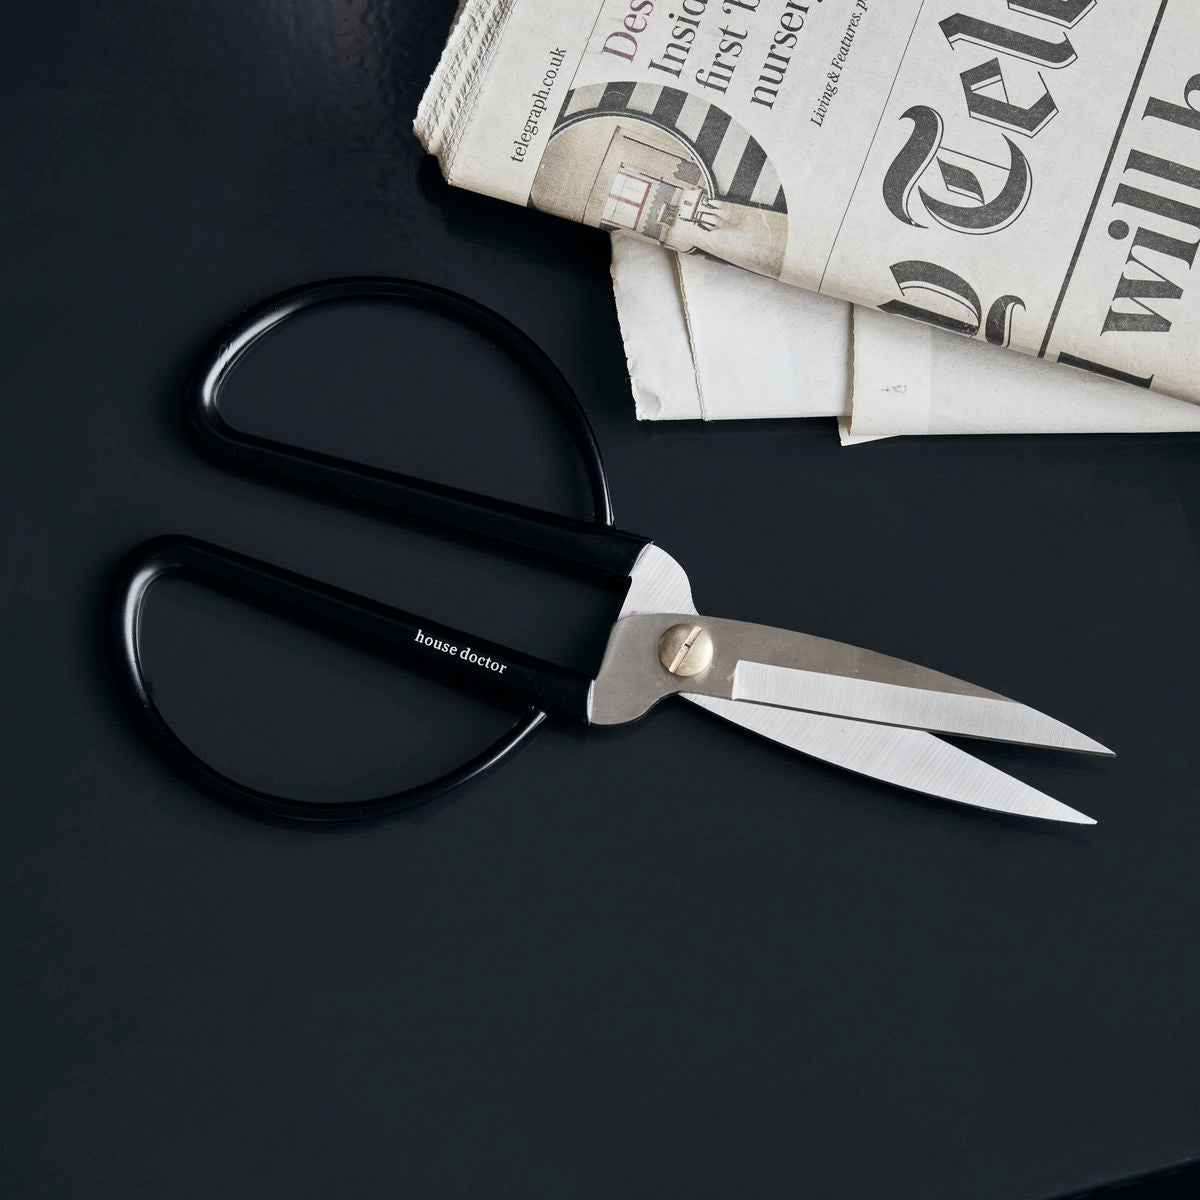 Stainless Steel Scissors with Black Handles